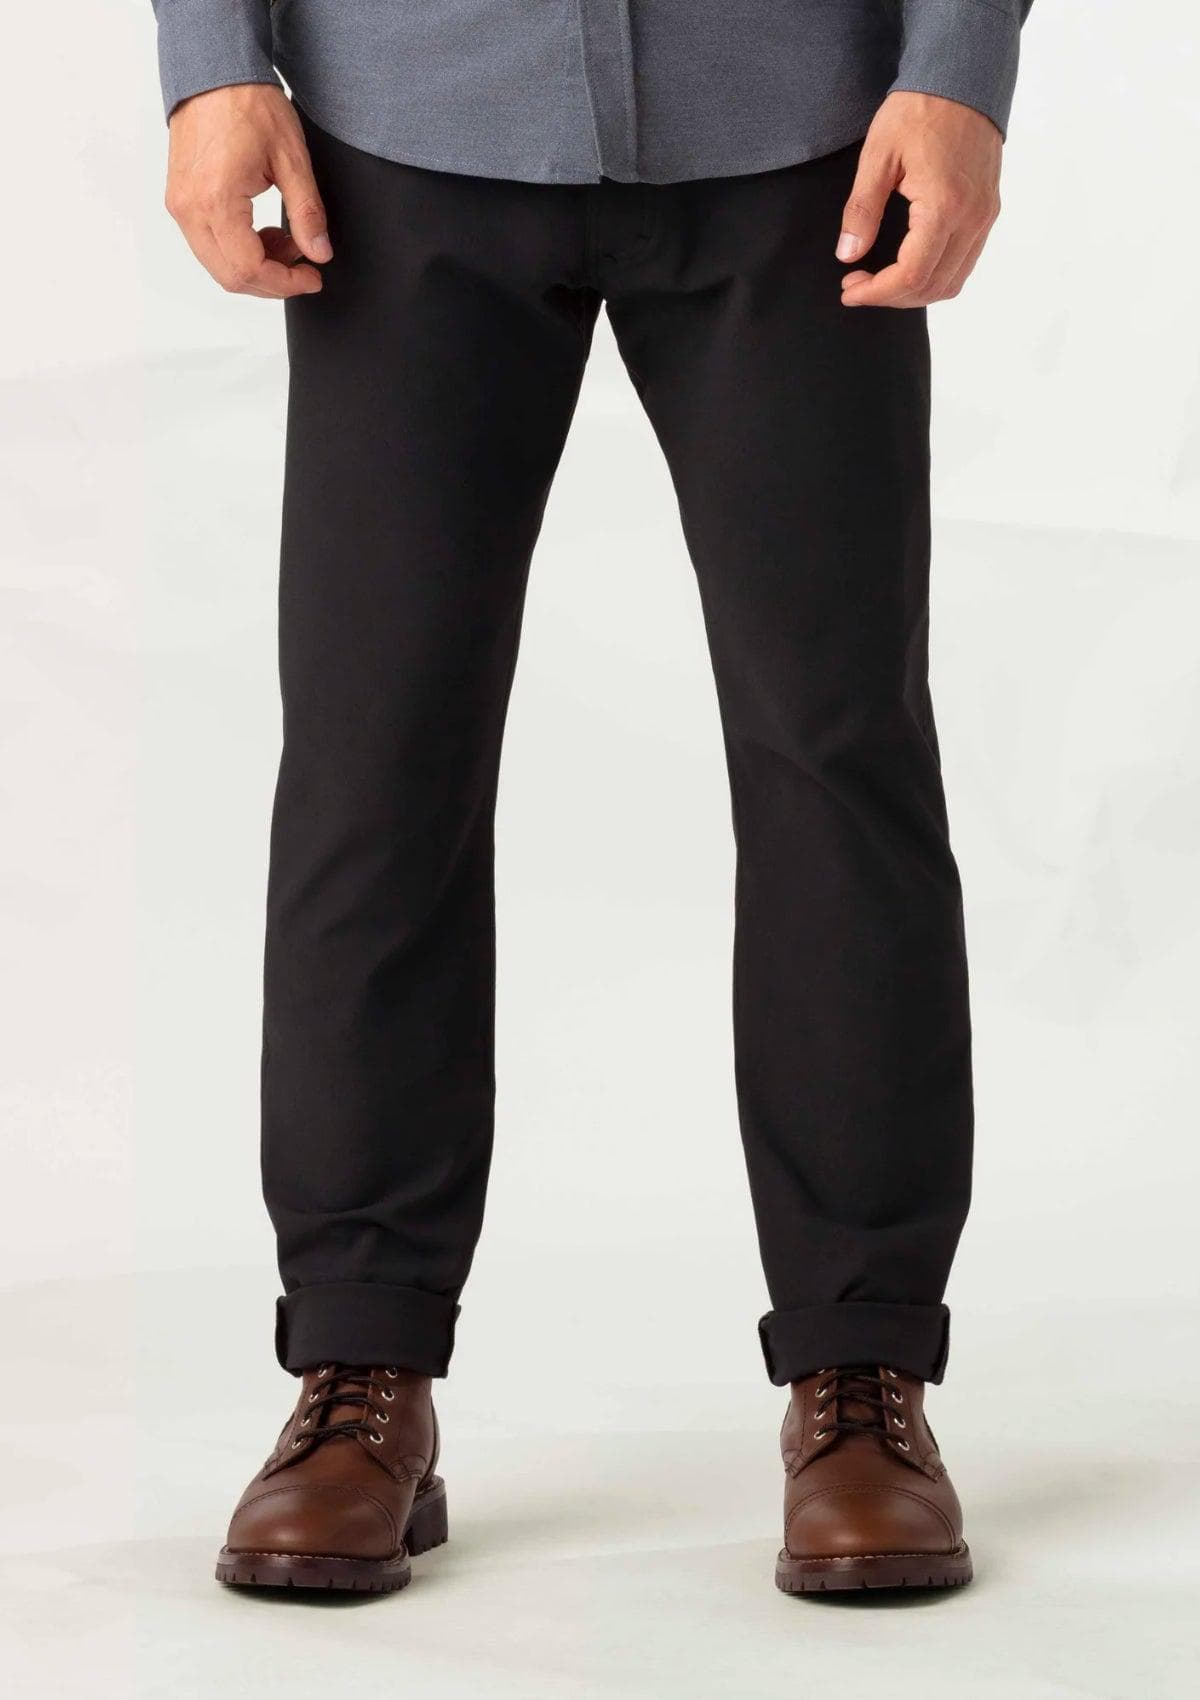 Olivers Downtown Pant - Black